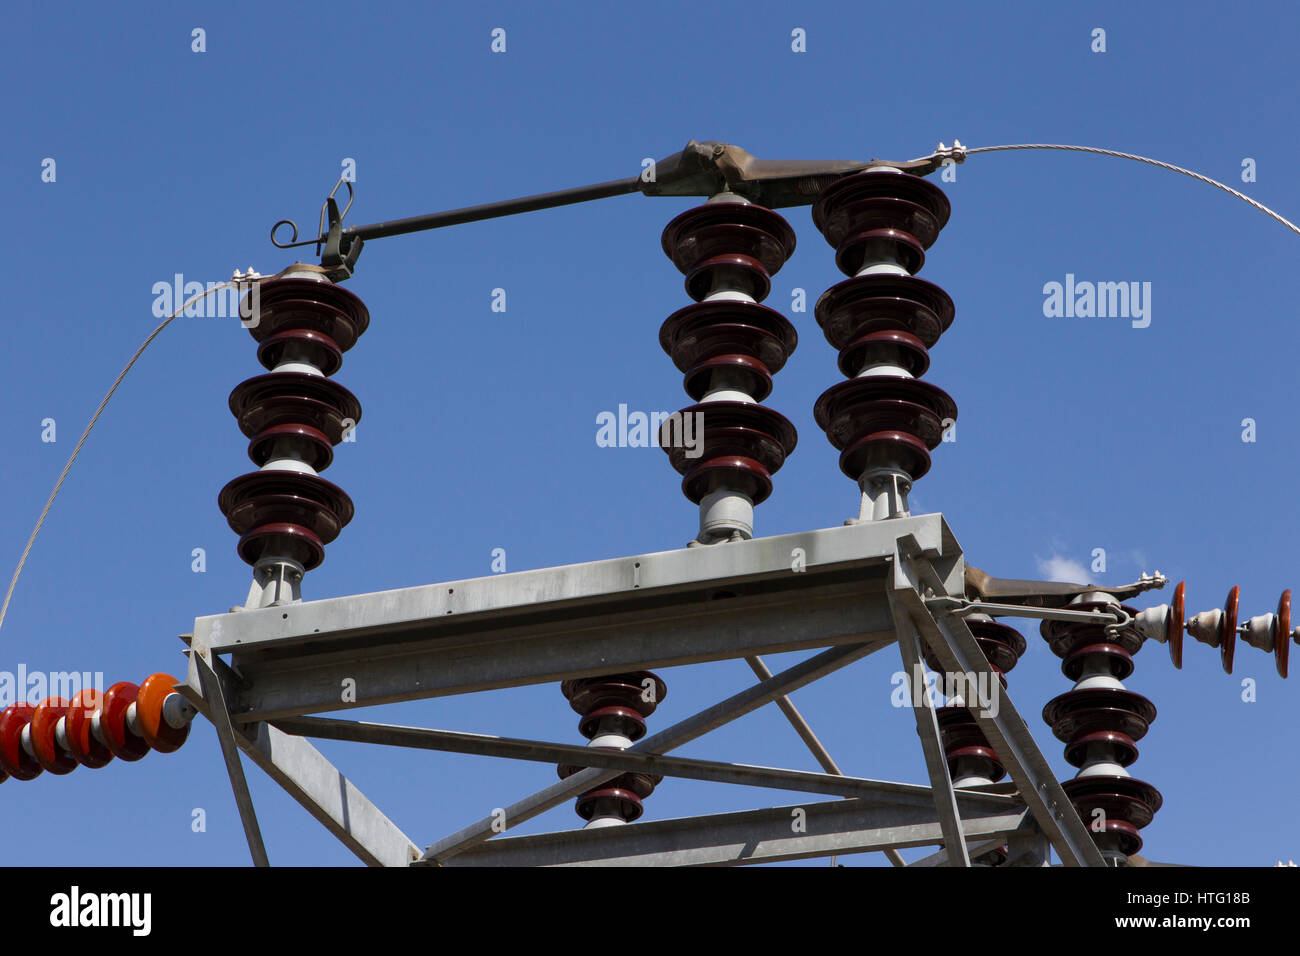 High-voltage insulators on an electrical transmission tower, Cabinet Gorge Dam, Clark Fork River, ID. Stock Photo